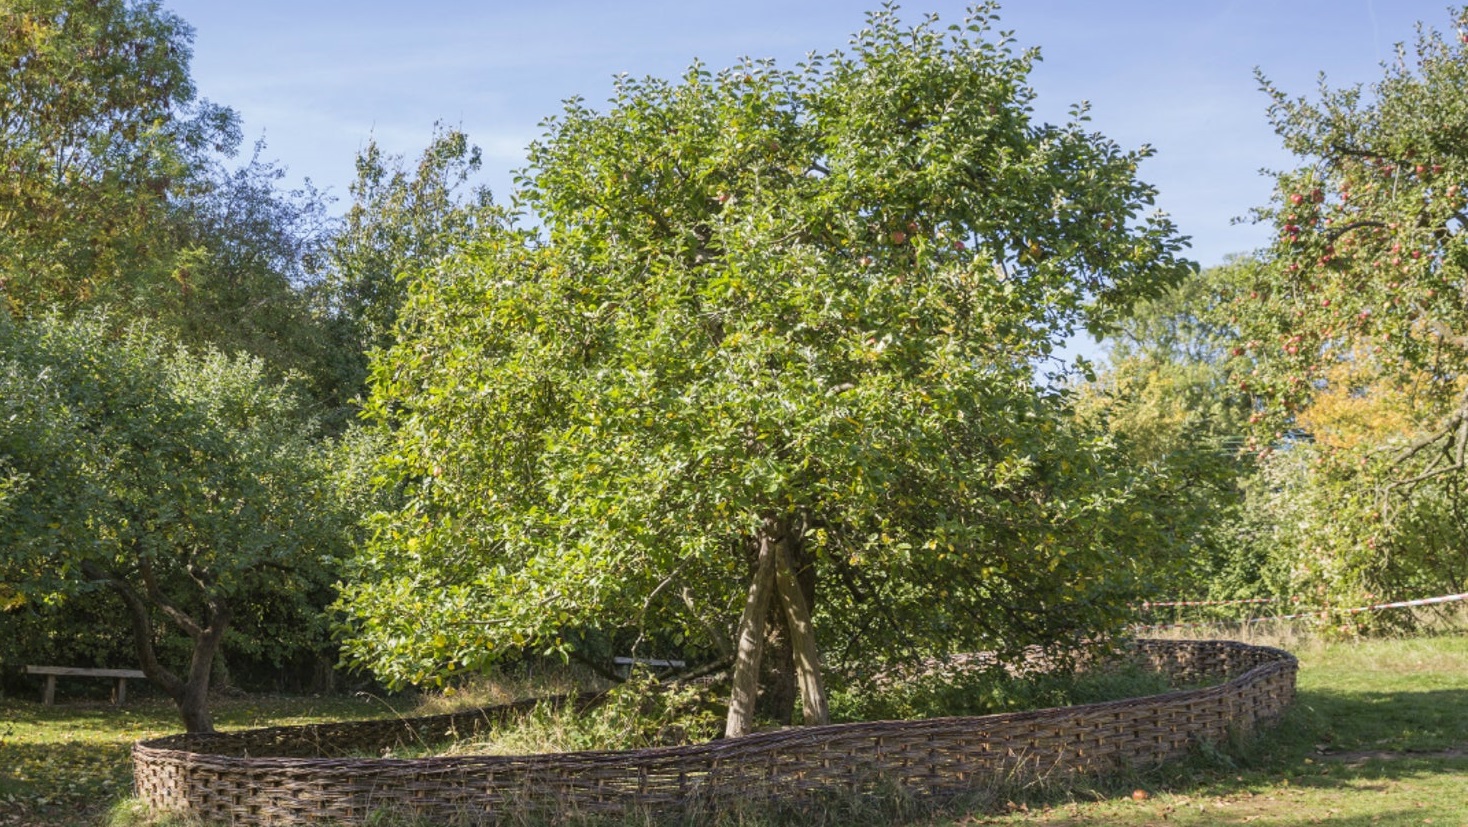 Newton's apple tree in the Wolstorp mansion